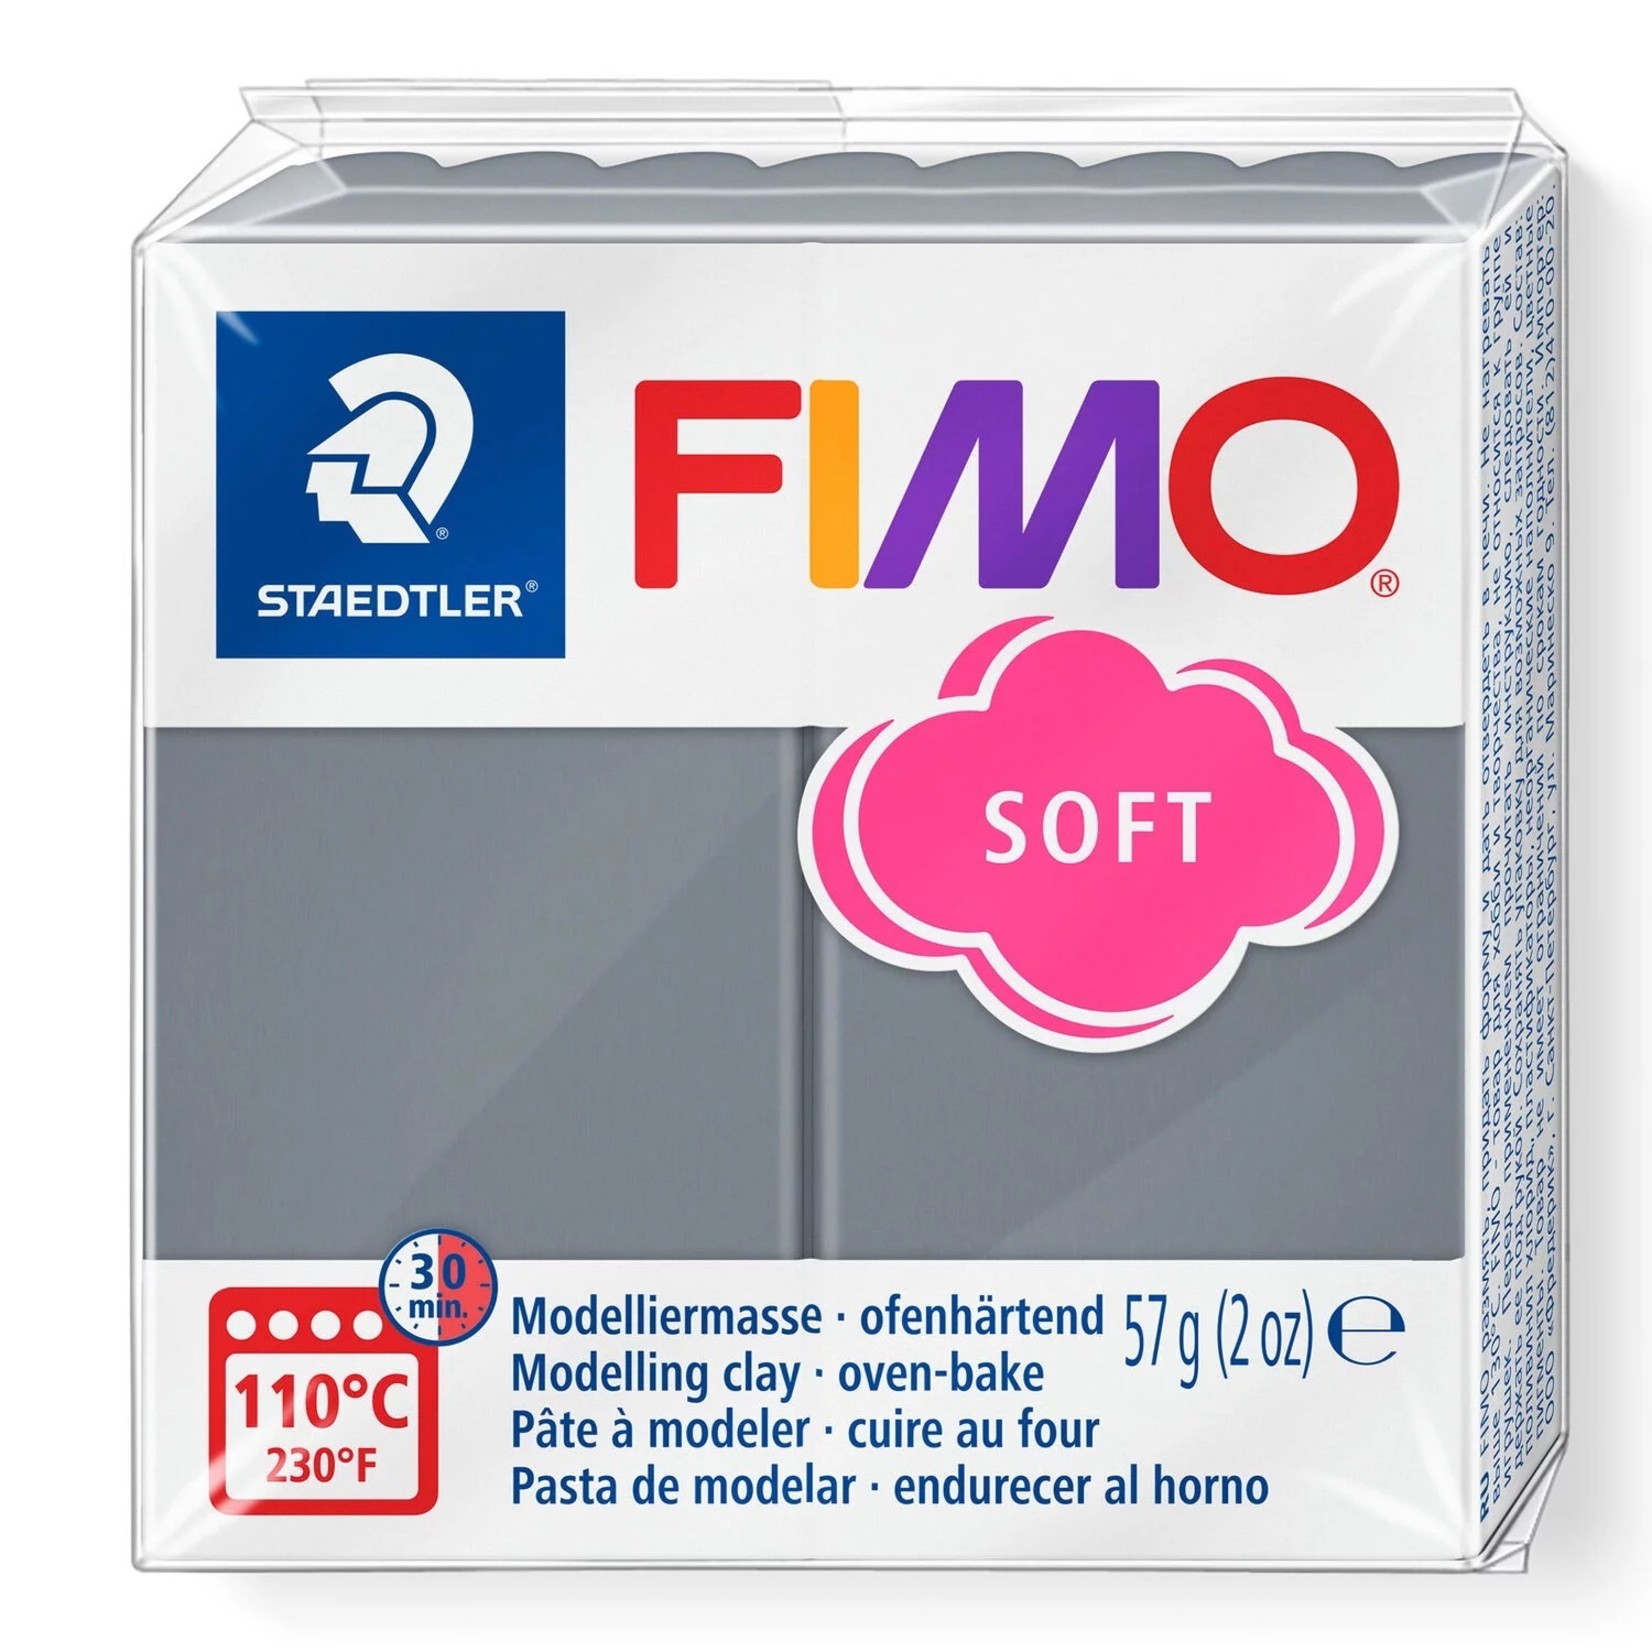 STAEDTLER FIMO SOFT T80 STORMY GREY